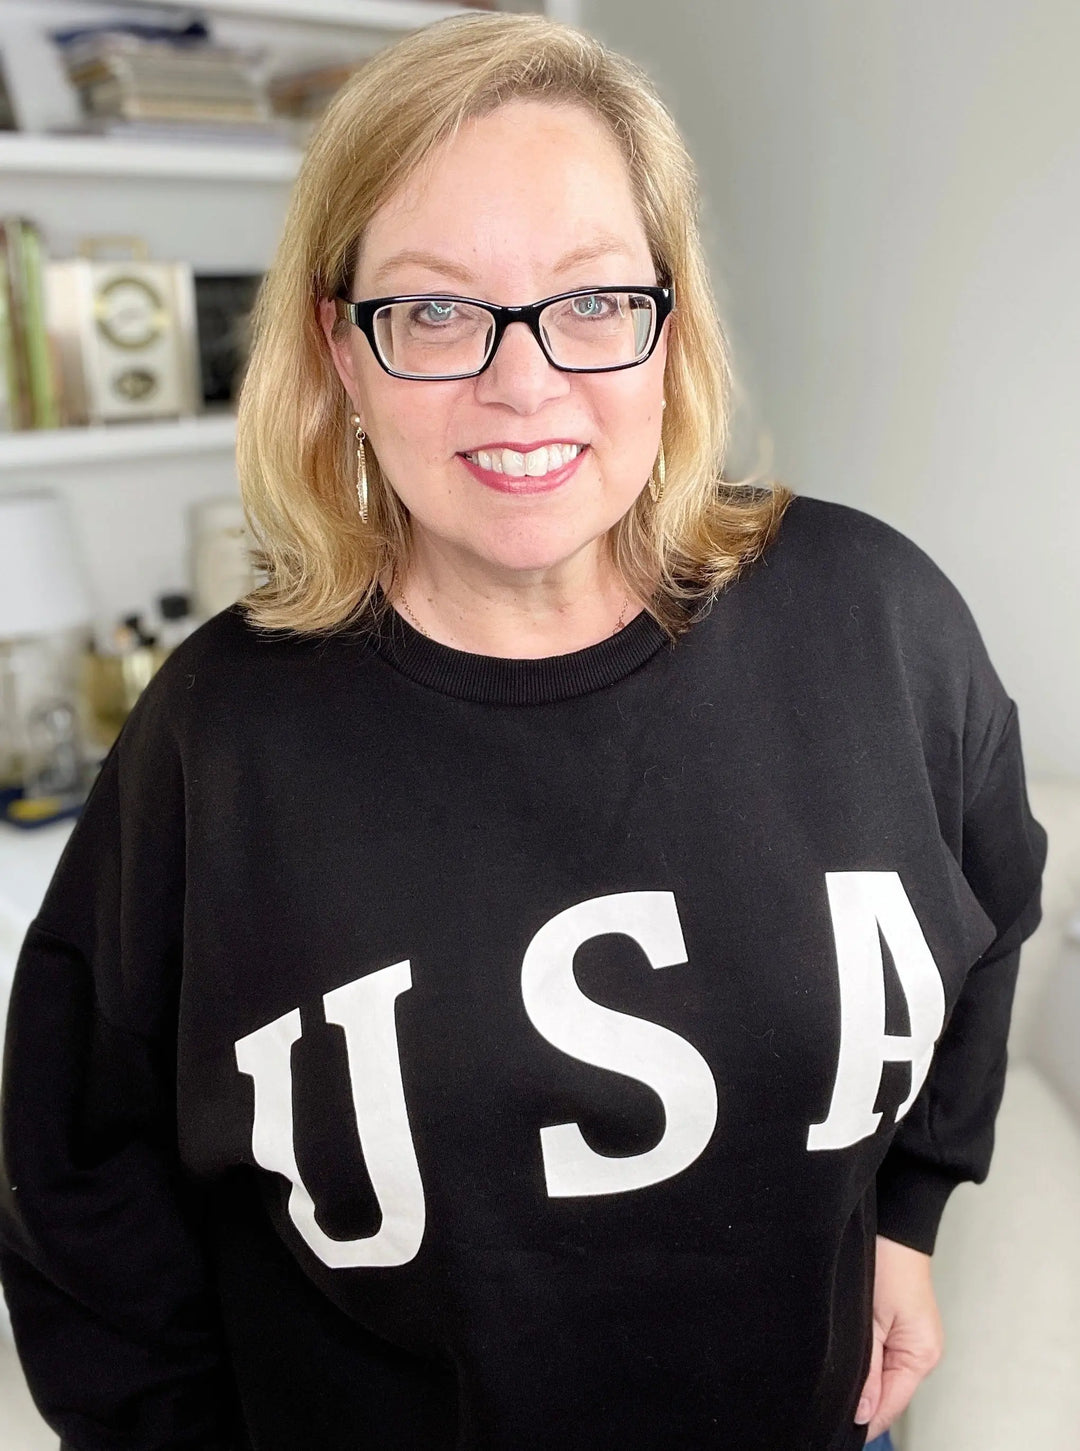 USA Relaxed Fit Black Sweatshirt-layer-Zenana-Styled by Steph-Women's Fashion Clothing Boutique, Indiana